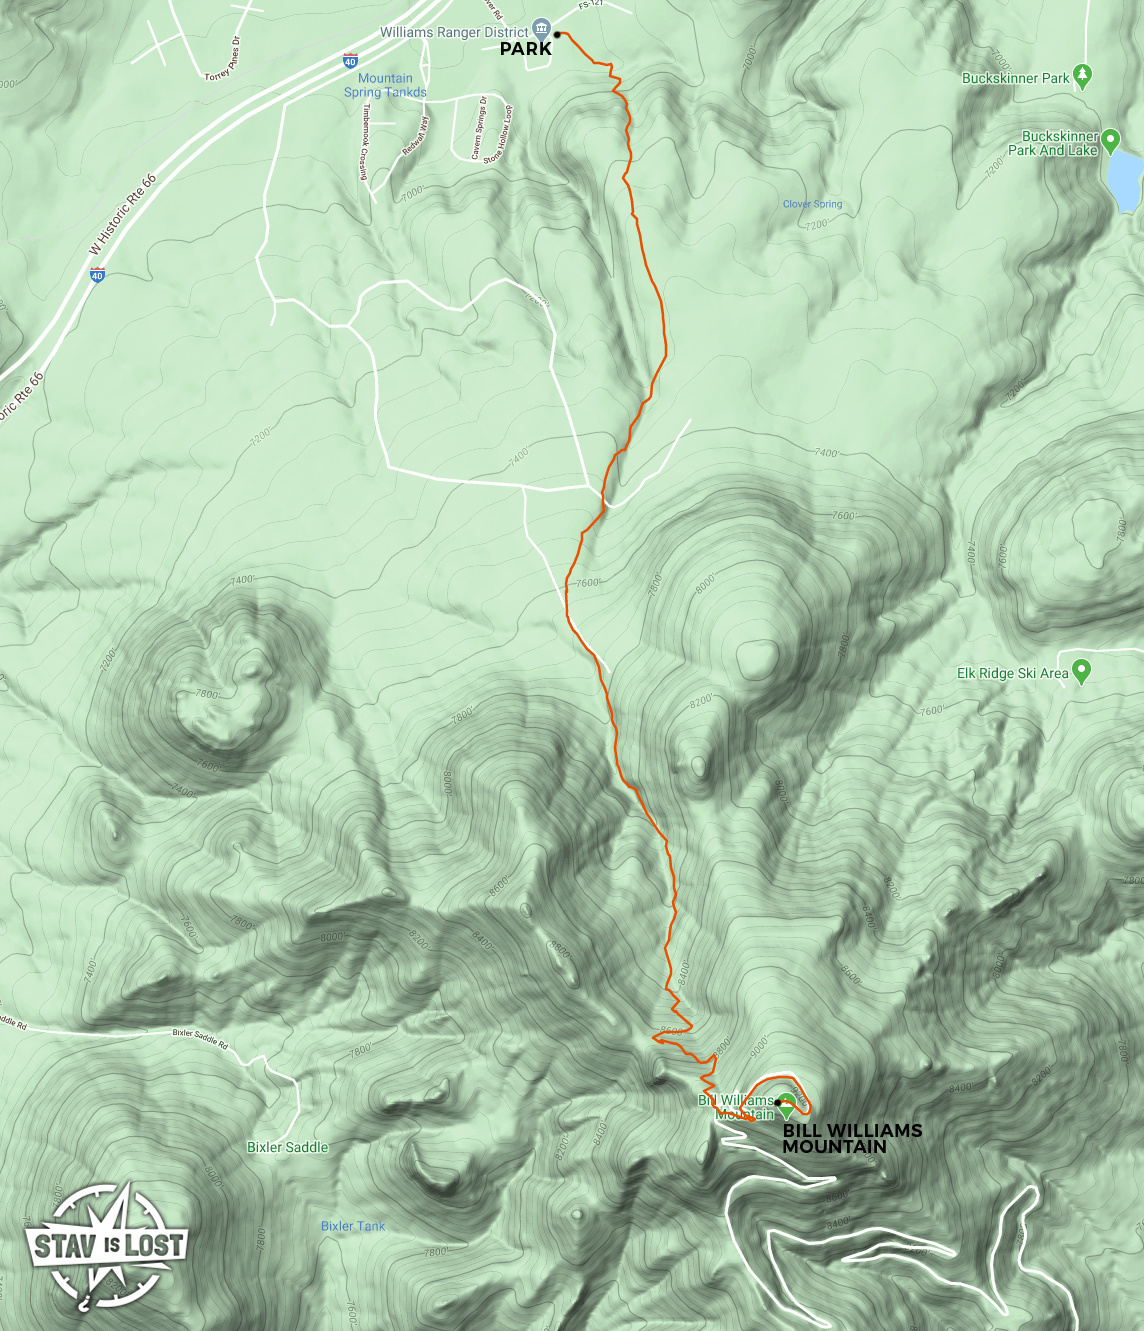 map for Bill Williams Mountain by stav is lost